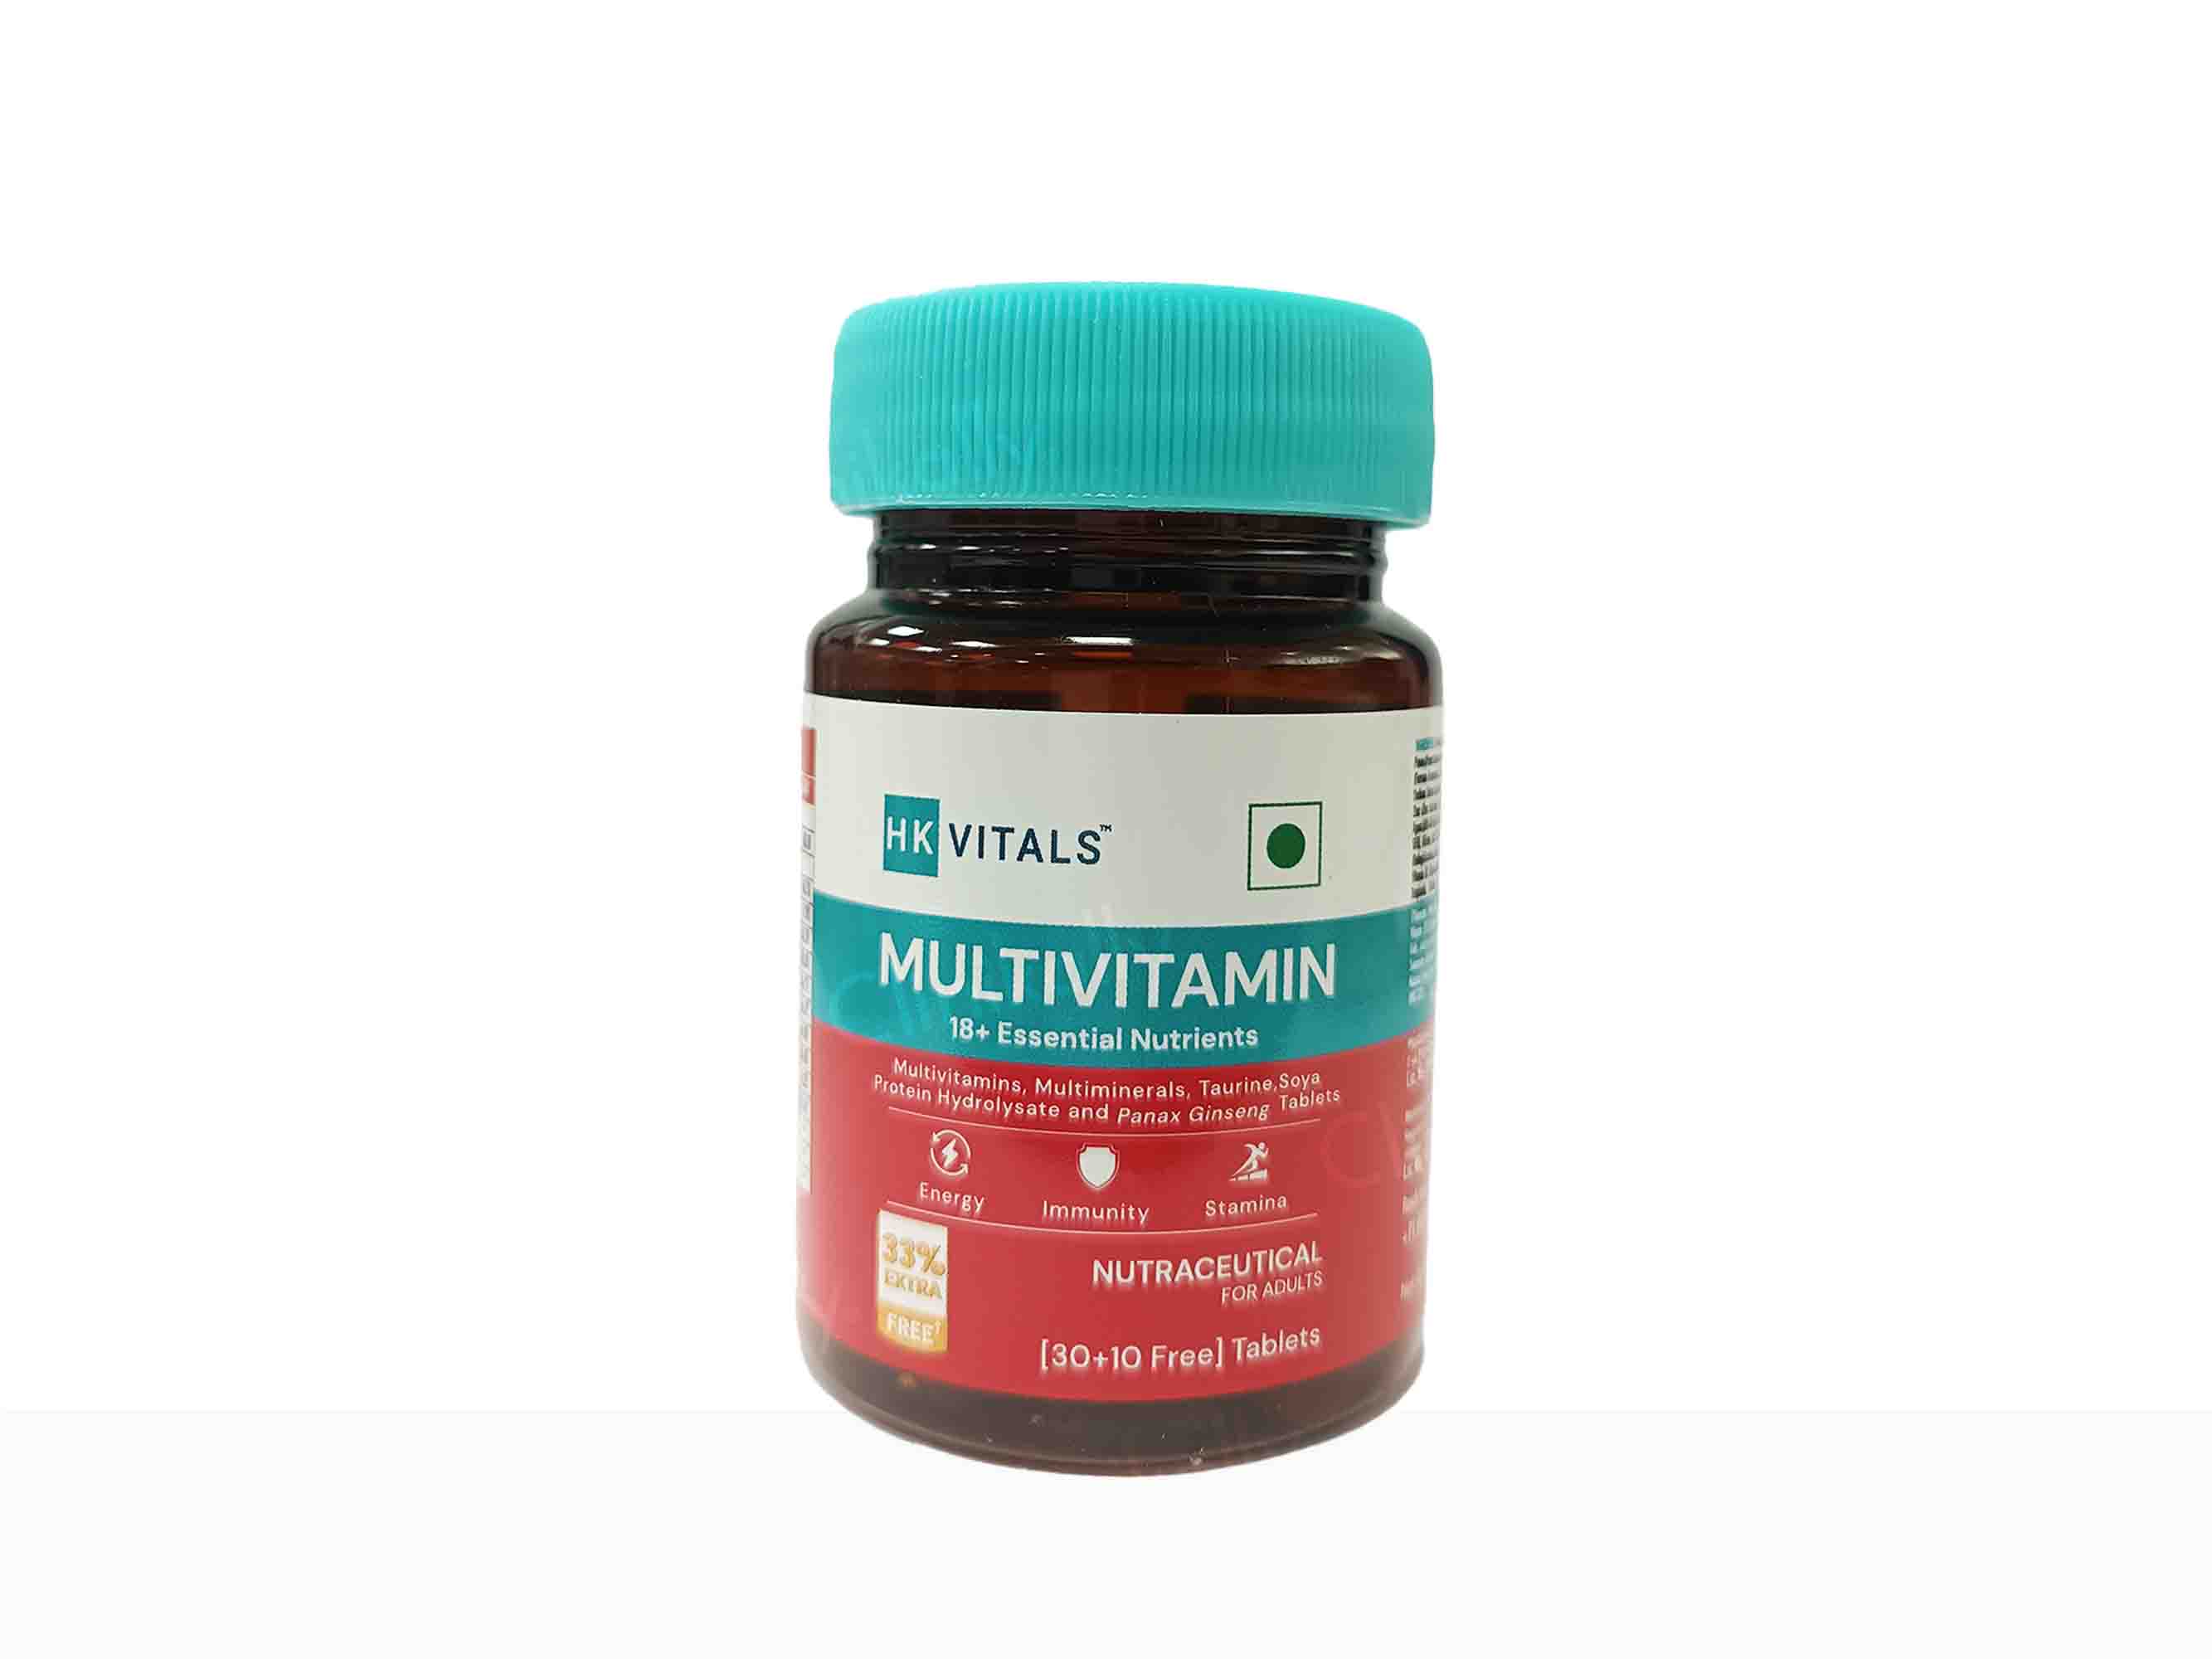 HK Vitals Multivitamin with Multimineral, Taurine & Ginseng Extract Tablet